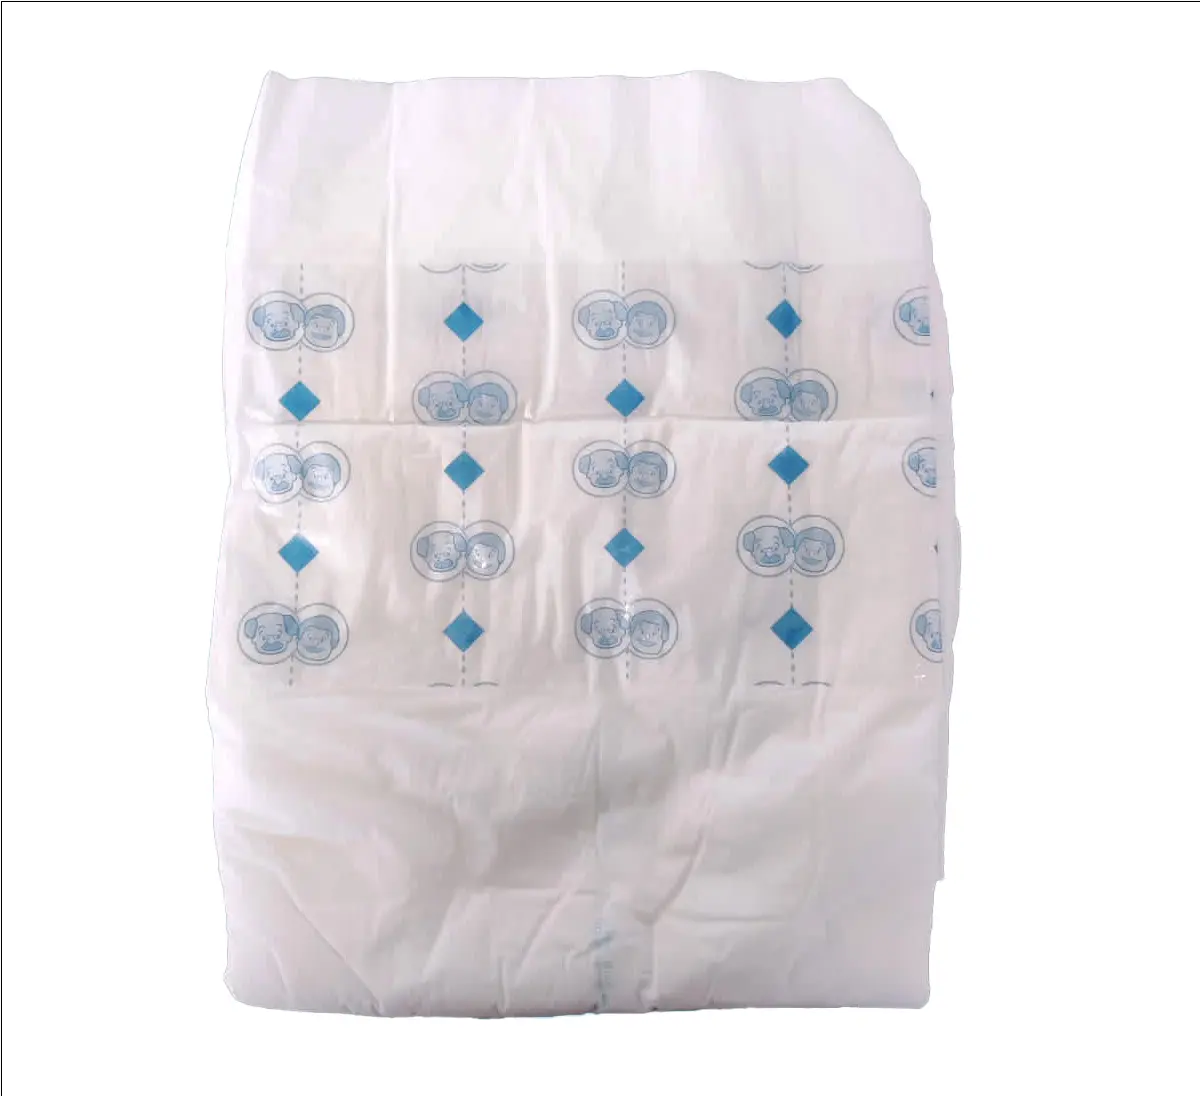 Disposable Tape Adult Diapers Customizable Senior Unisex Tape Diapers from Manufacturers at Wholesale Price